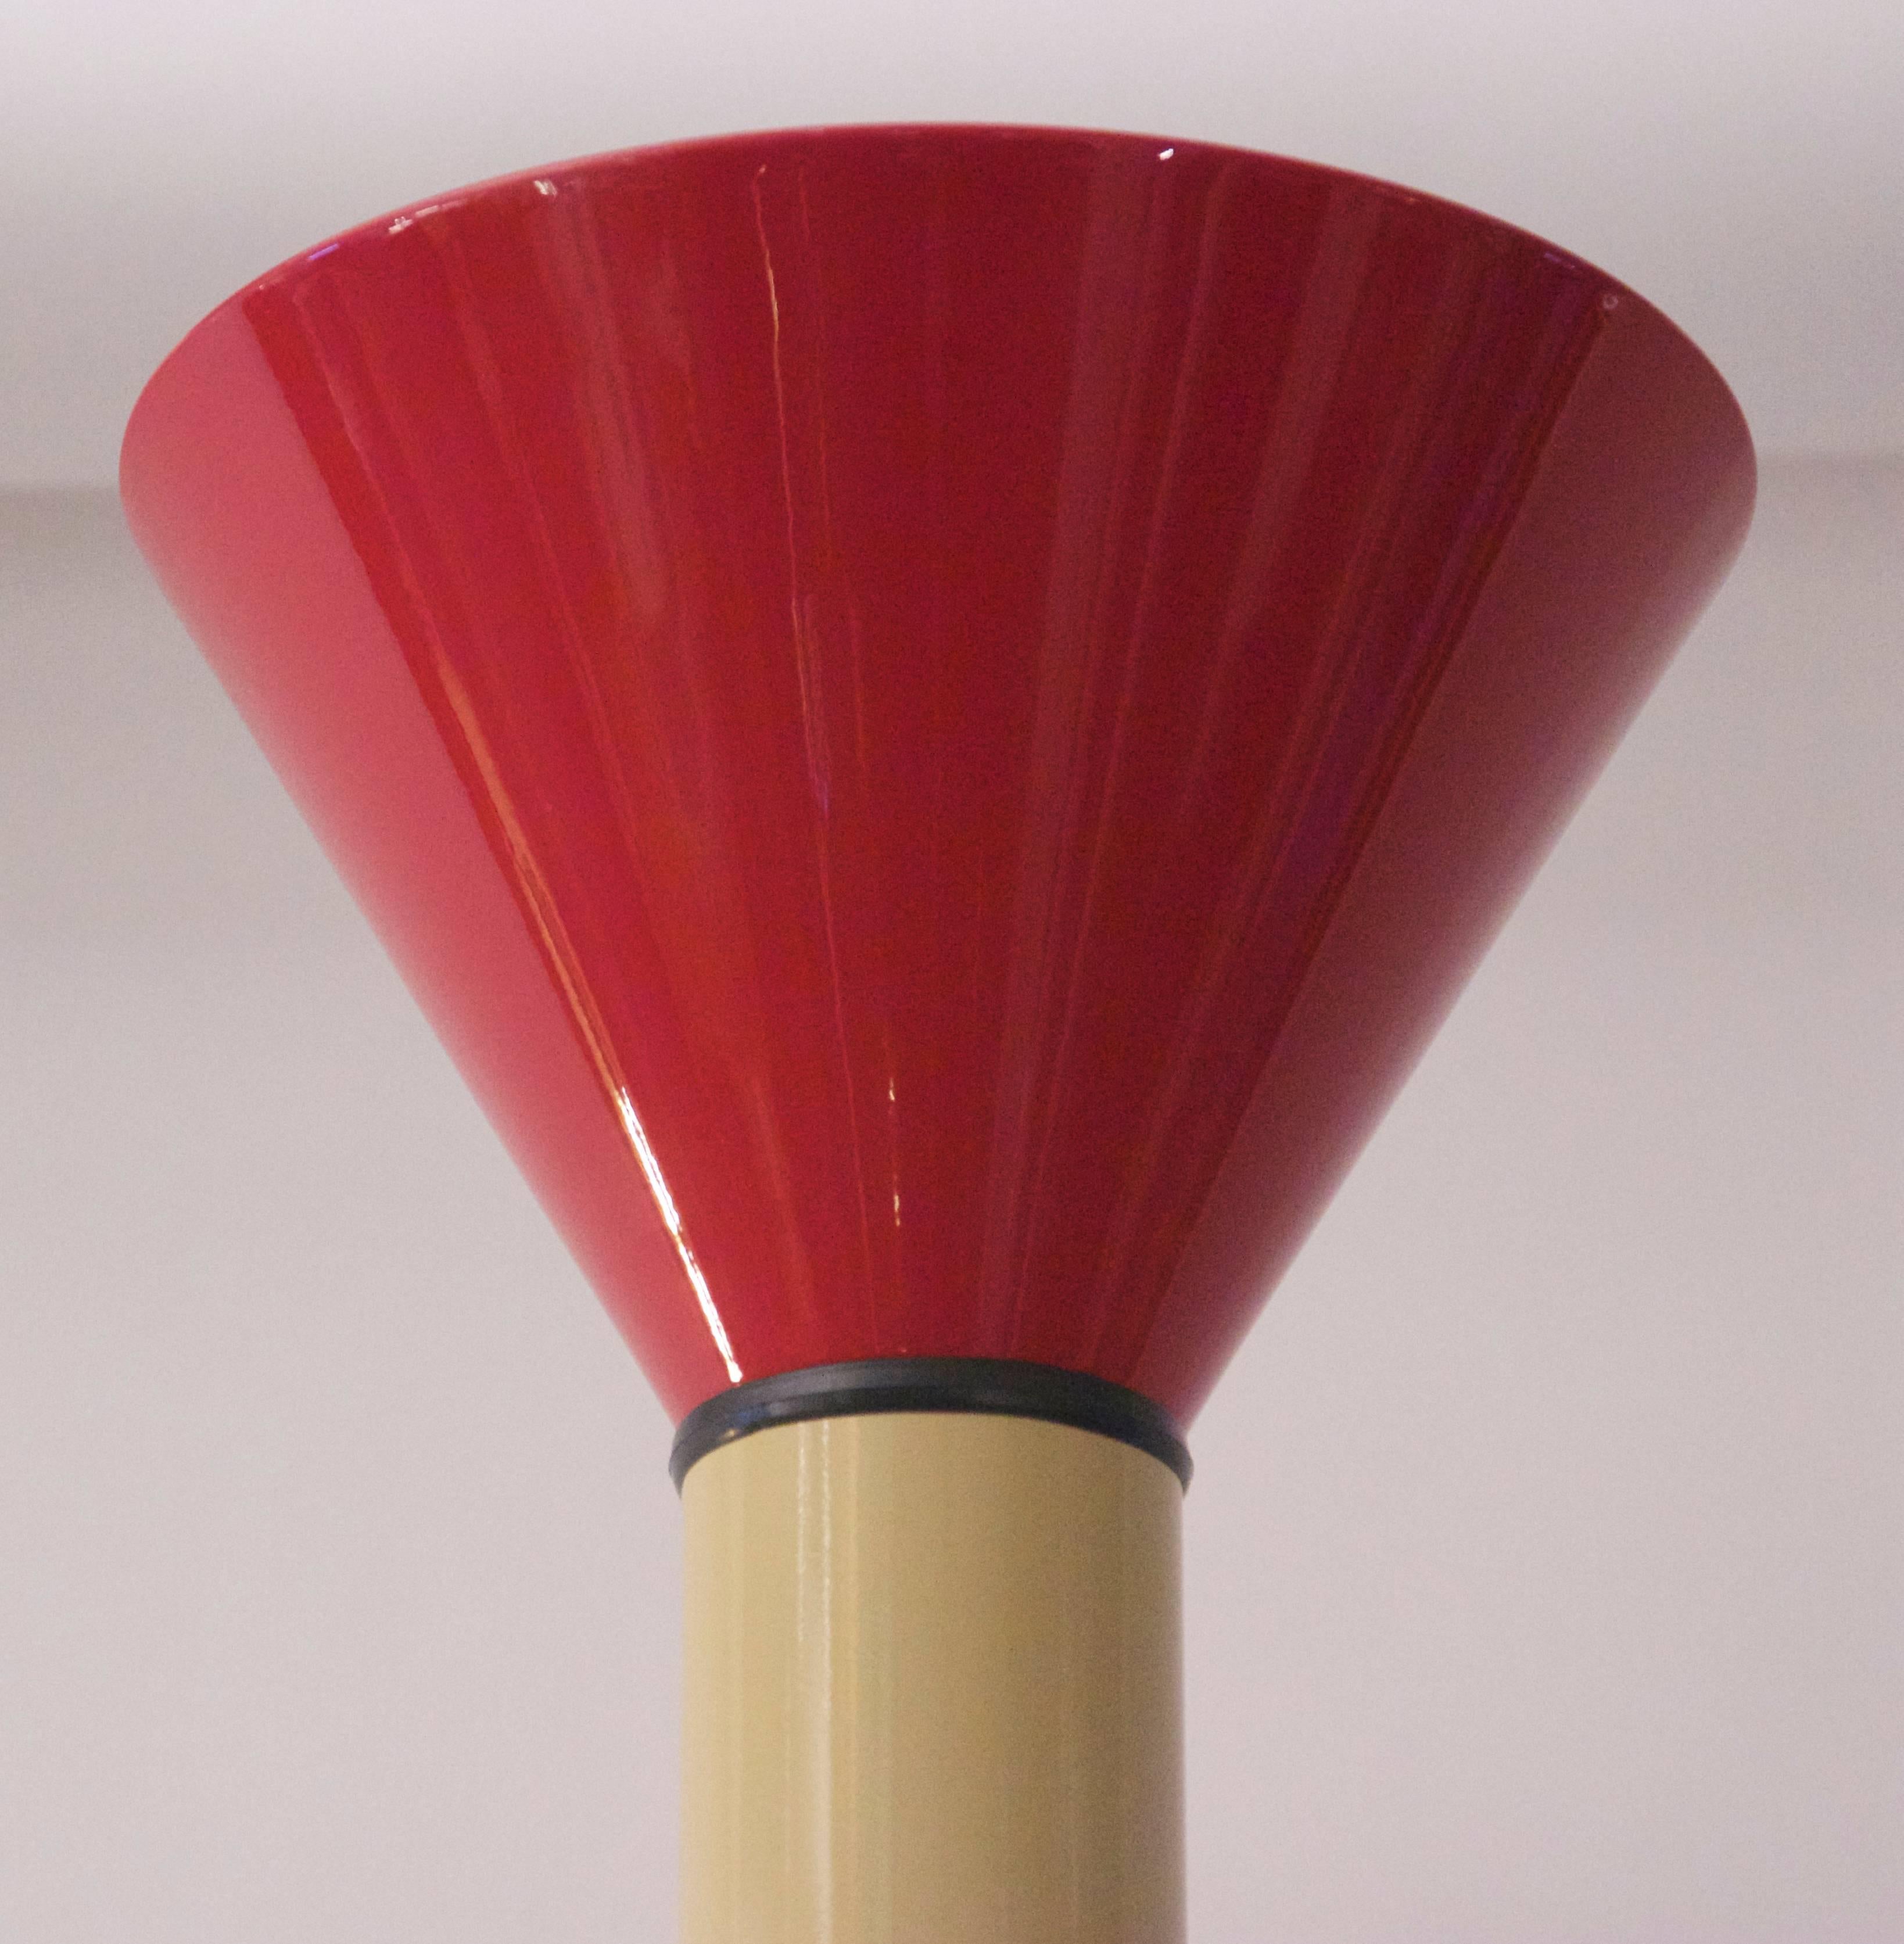 Ettore Sottsass, Callimaco floor lamp, 
Artemide manufacturer, 
lacquered metal and metal,
circa 1980, Italy.
Measure: Height 2 m, diameter 39 cm.